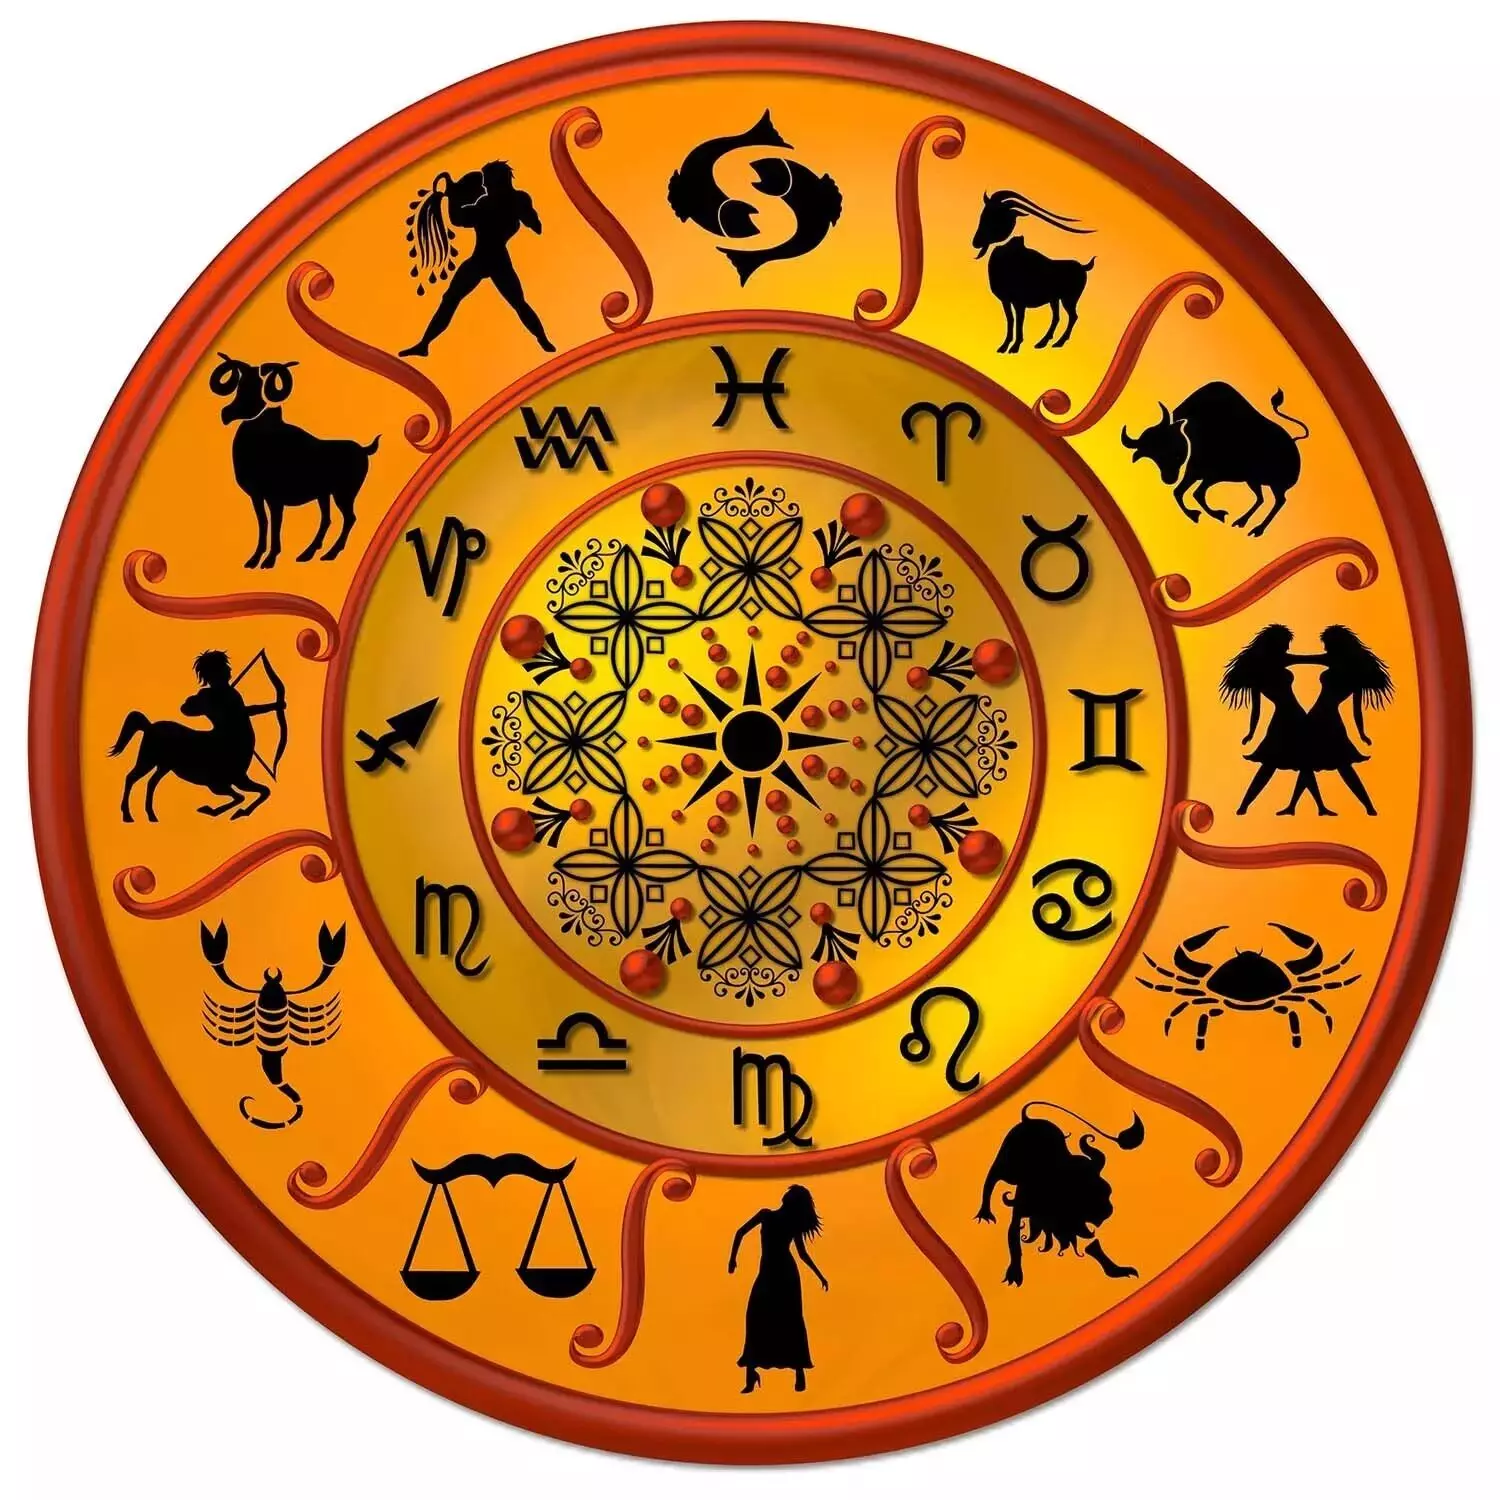 01 September  – Know your todays horoscope